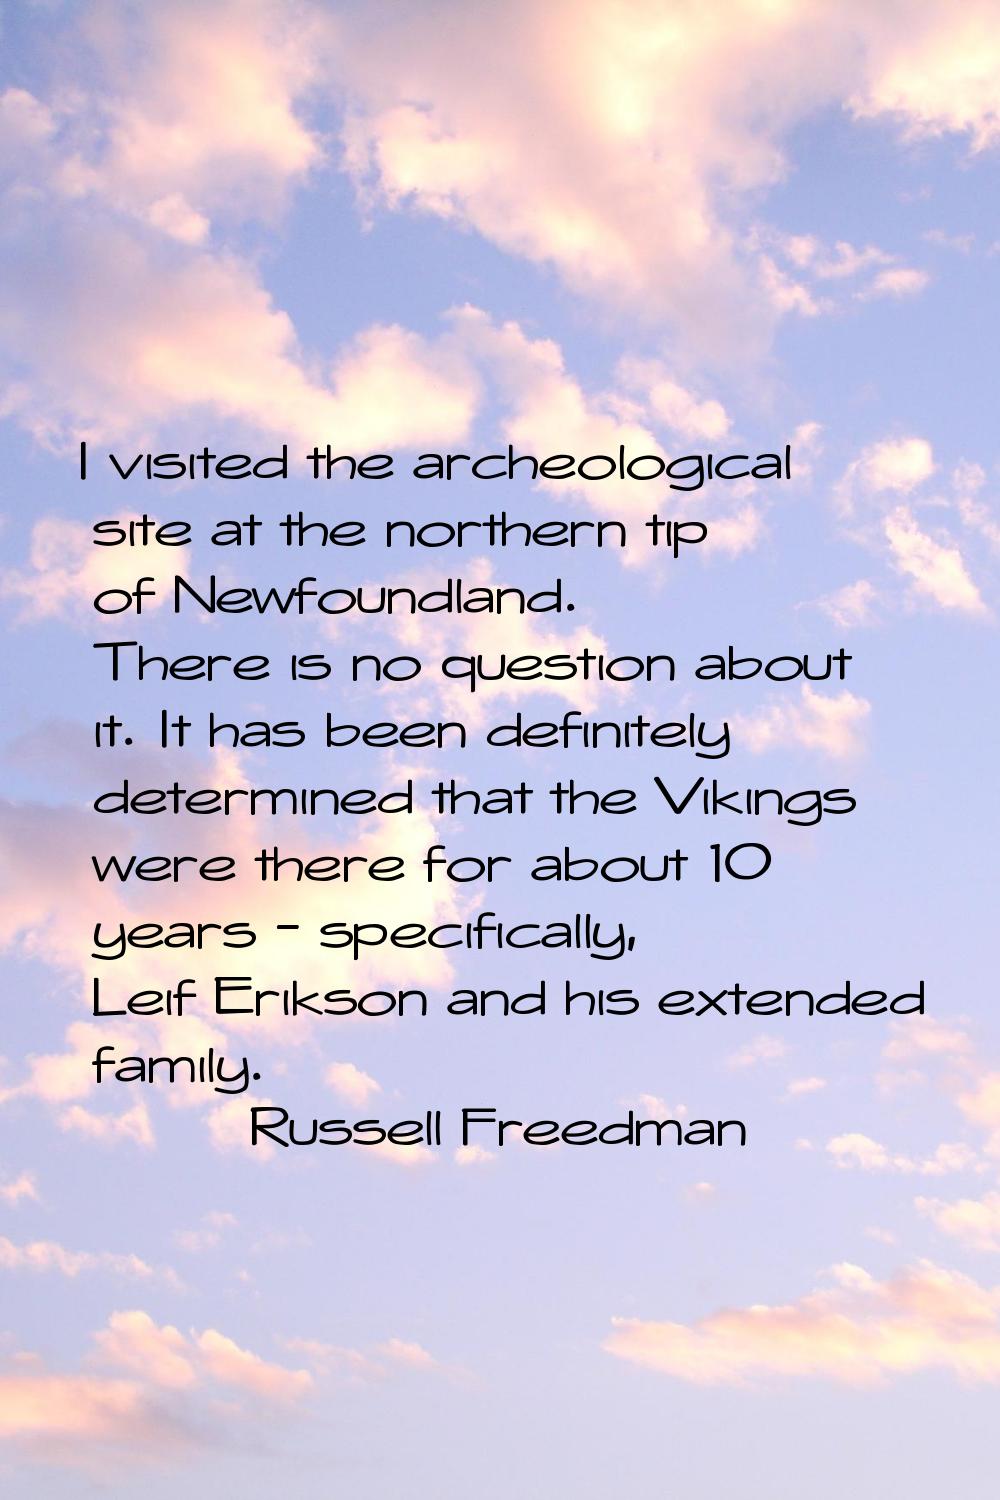 I visited the archeological site at the northern tip of Newfoundland. There is no question about it